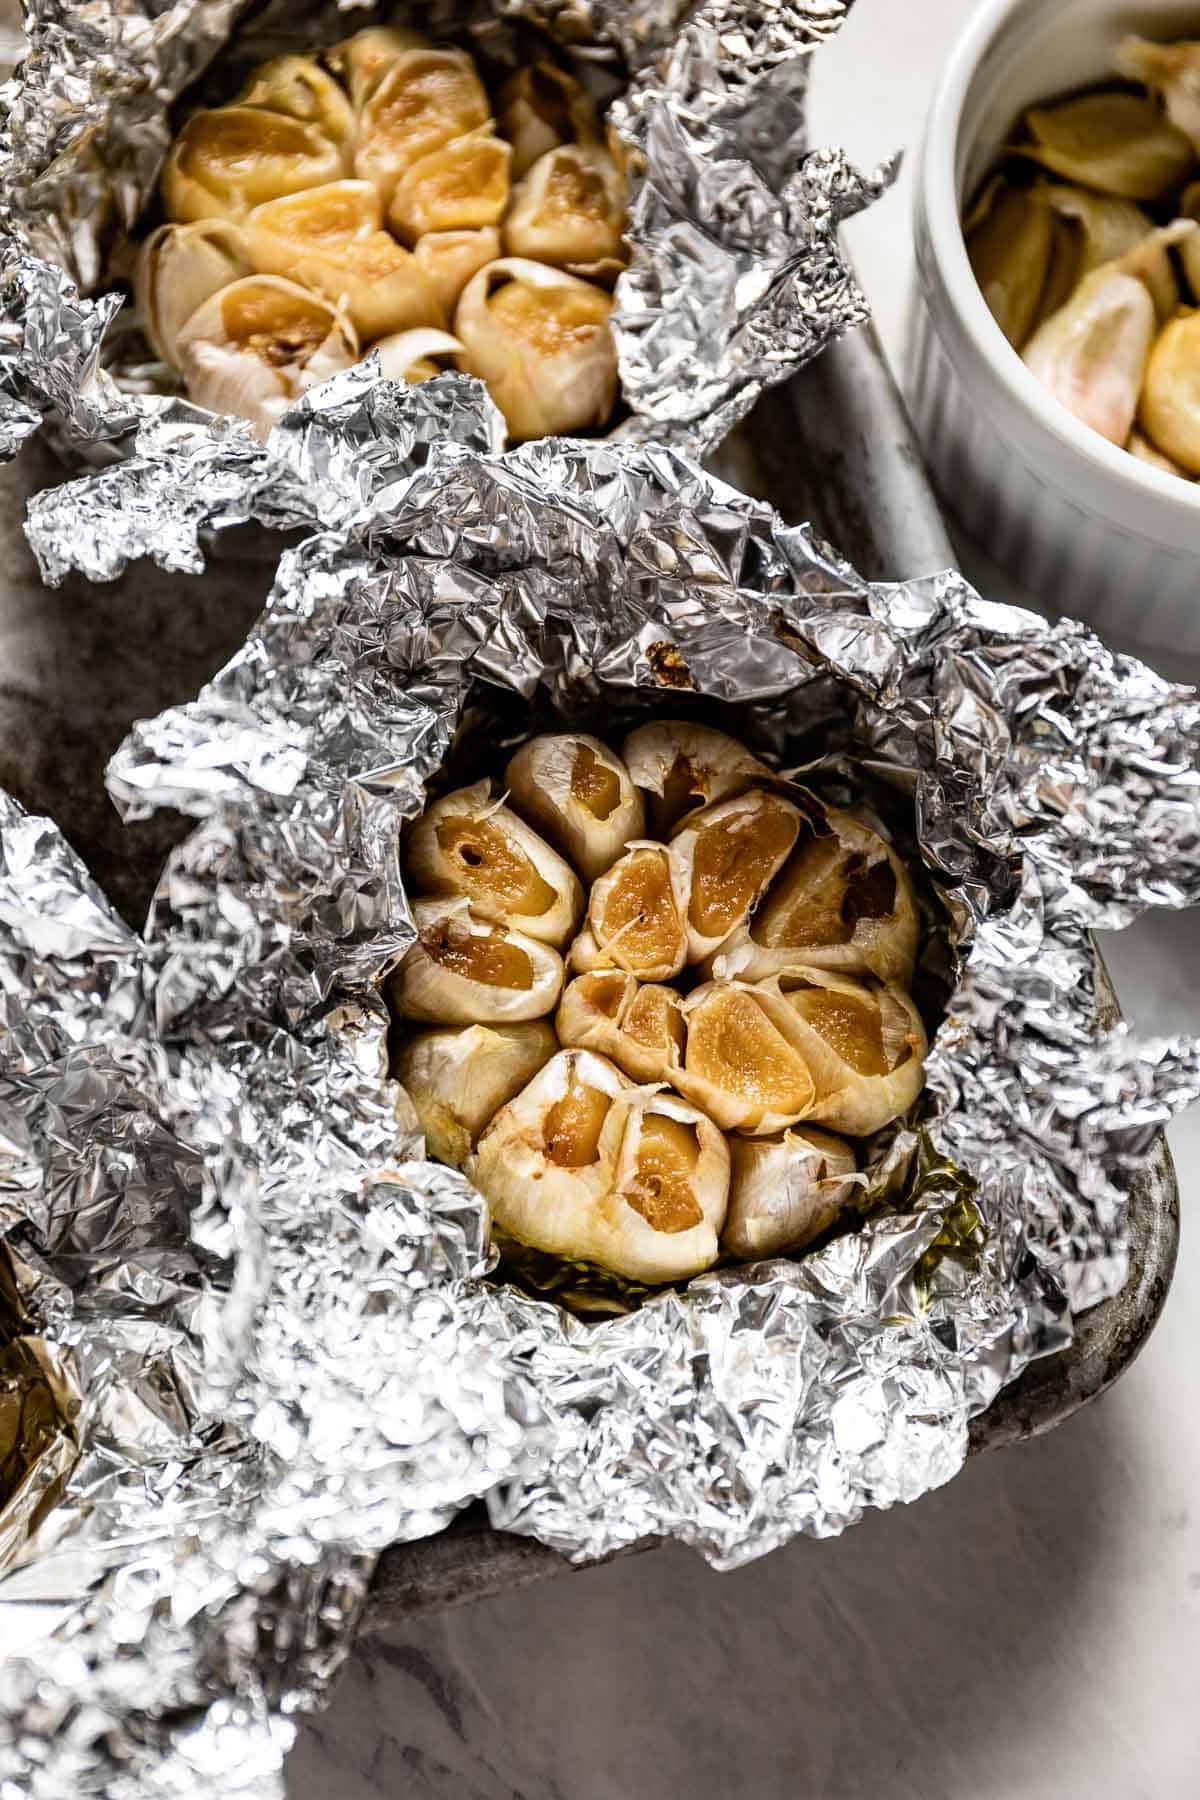 A top view of foil-wrapped heads of roasted garlic.